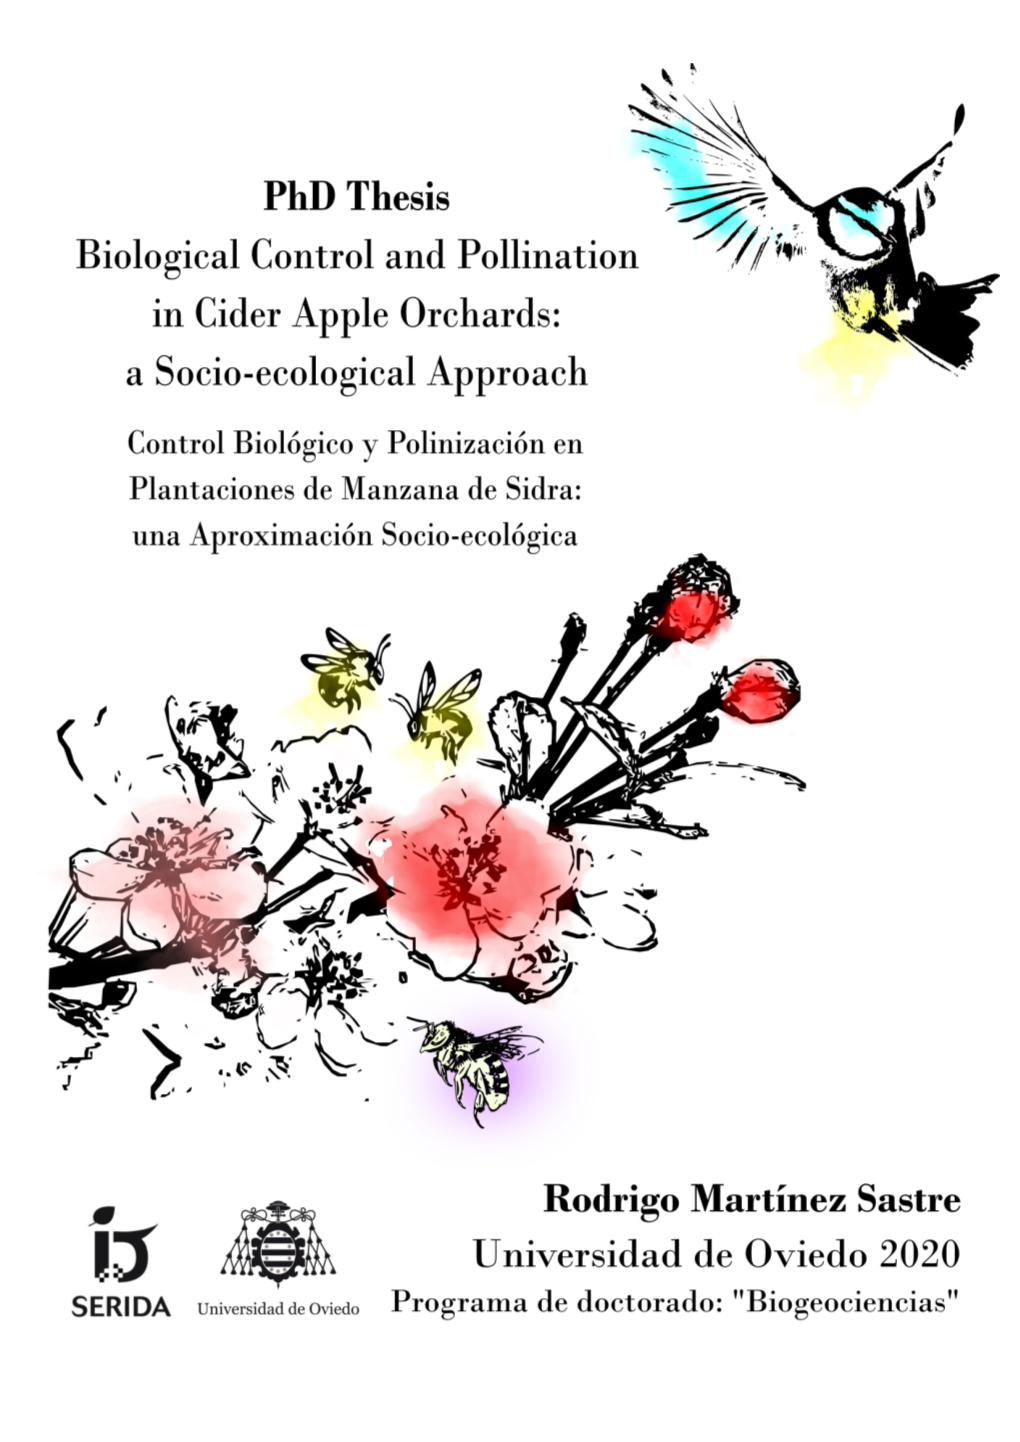 Biological Control and Pollination in Cider Apple Orchards: a Socio-Ecological